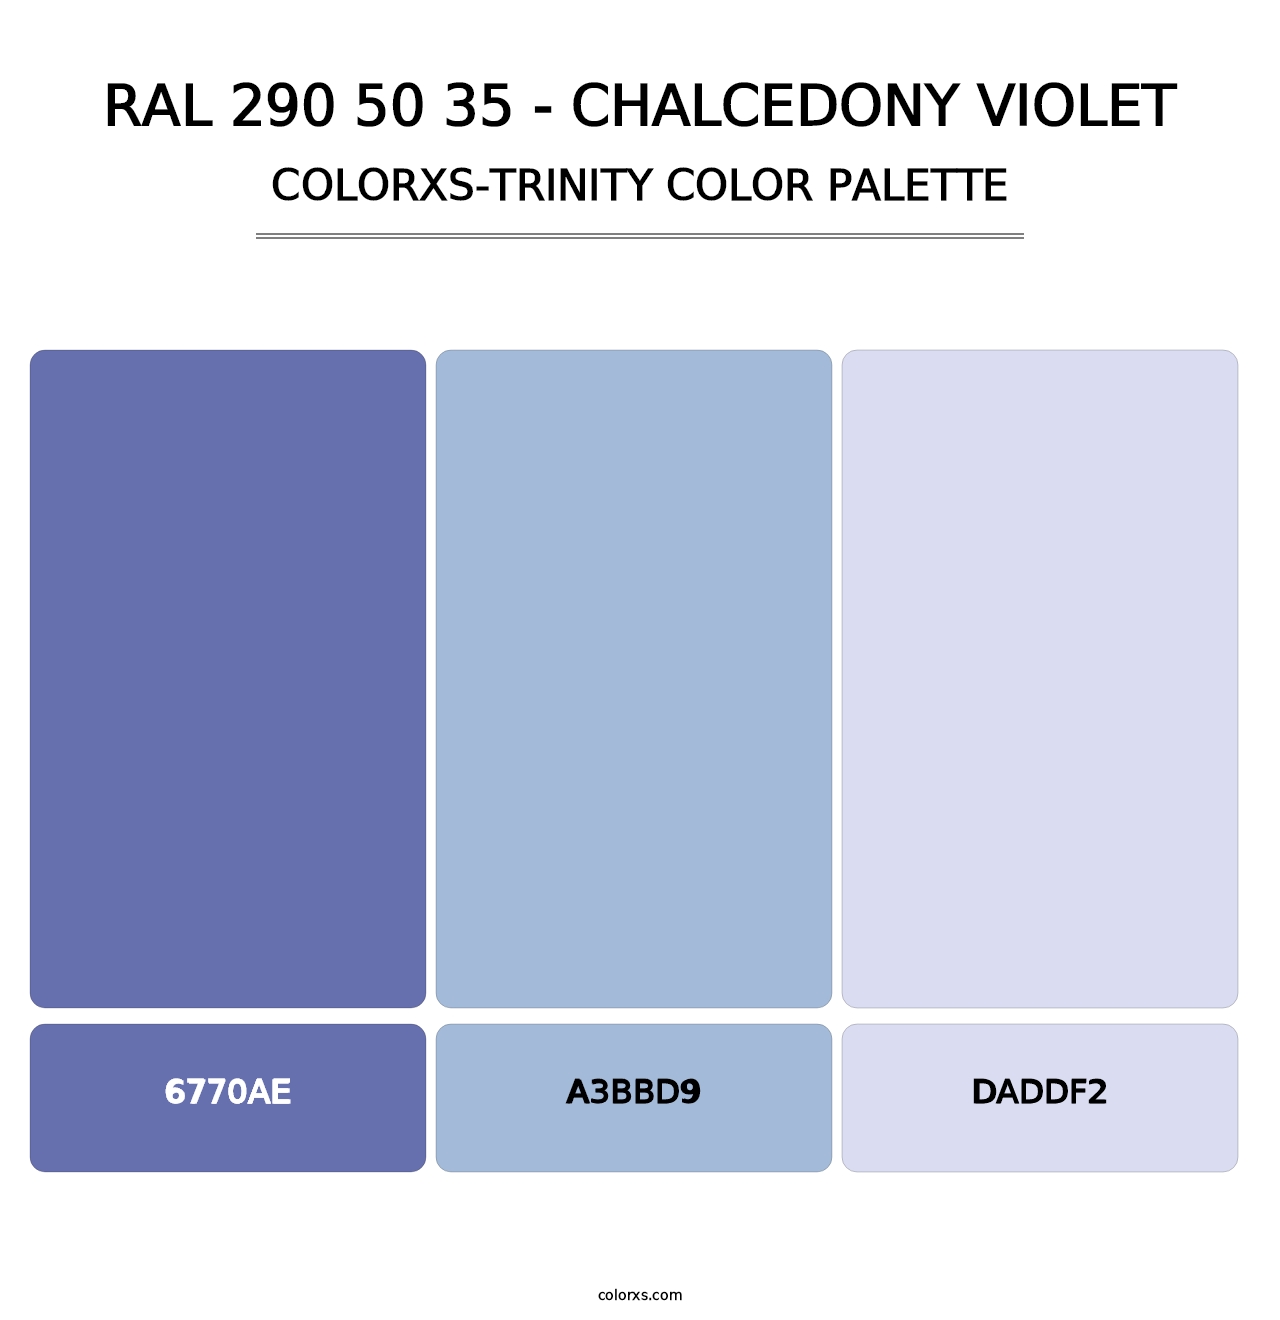 RAL 290 50 35 - Chalcedony Violet - Colorxs Trinity Palette